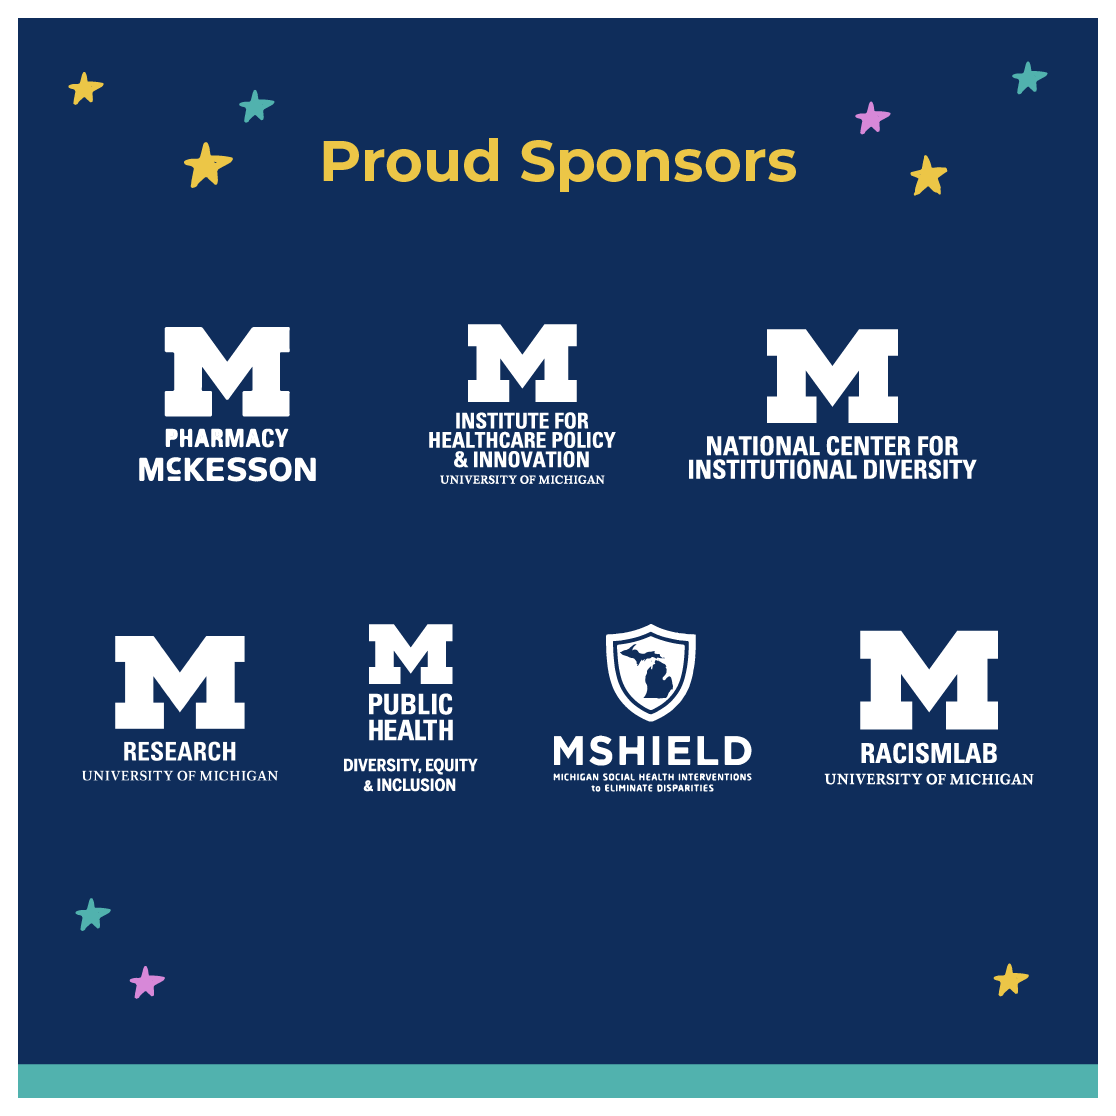 Proud Sponsors: UM Pharmacy, UM Institute for Healthcare Policy & Innovation, UM National Center for Institutional Diversity, UM Research, UM Public Health, MSHIELD, and RacismLab